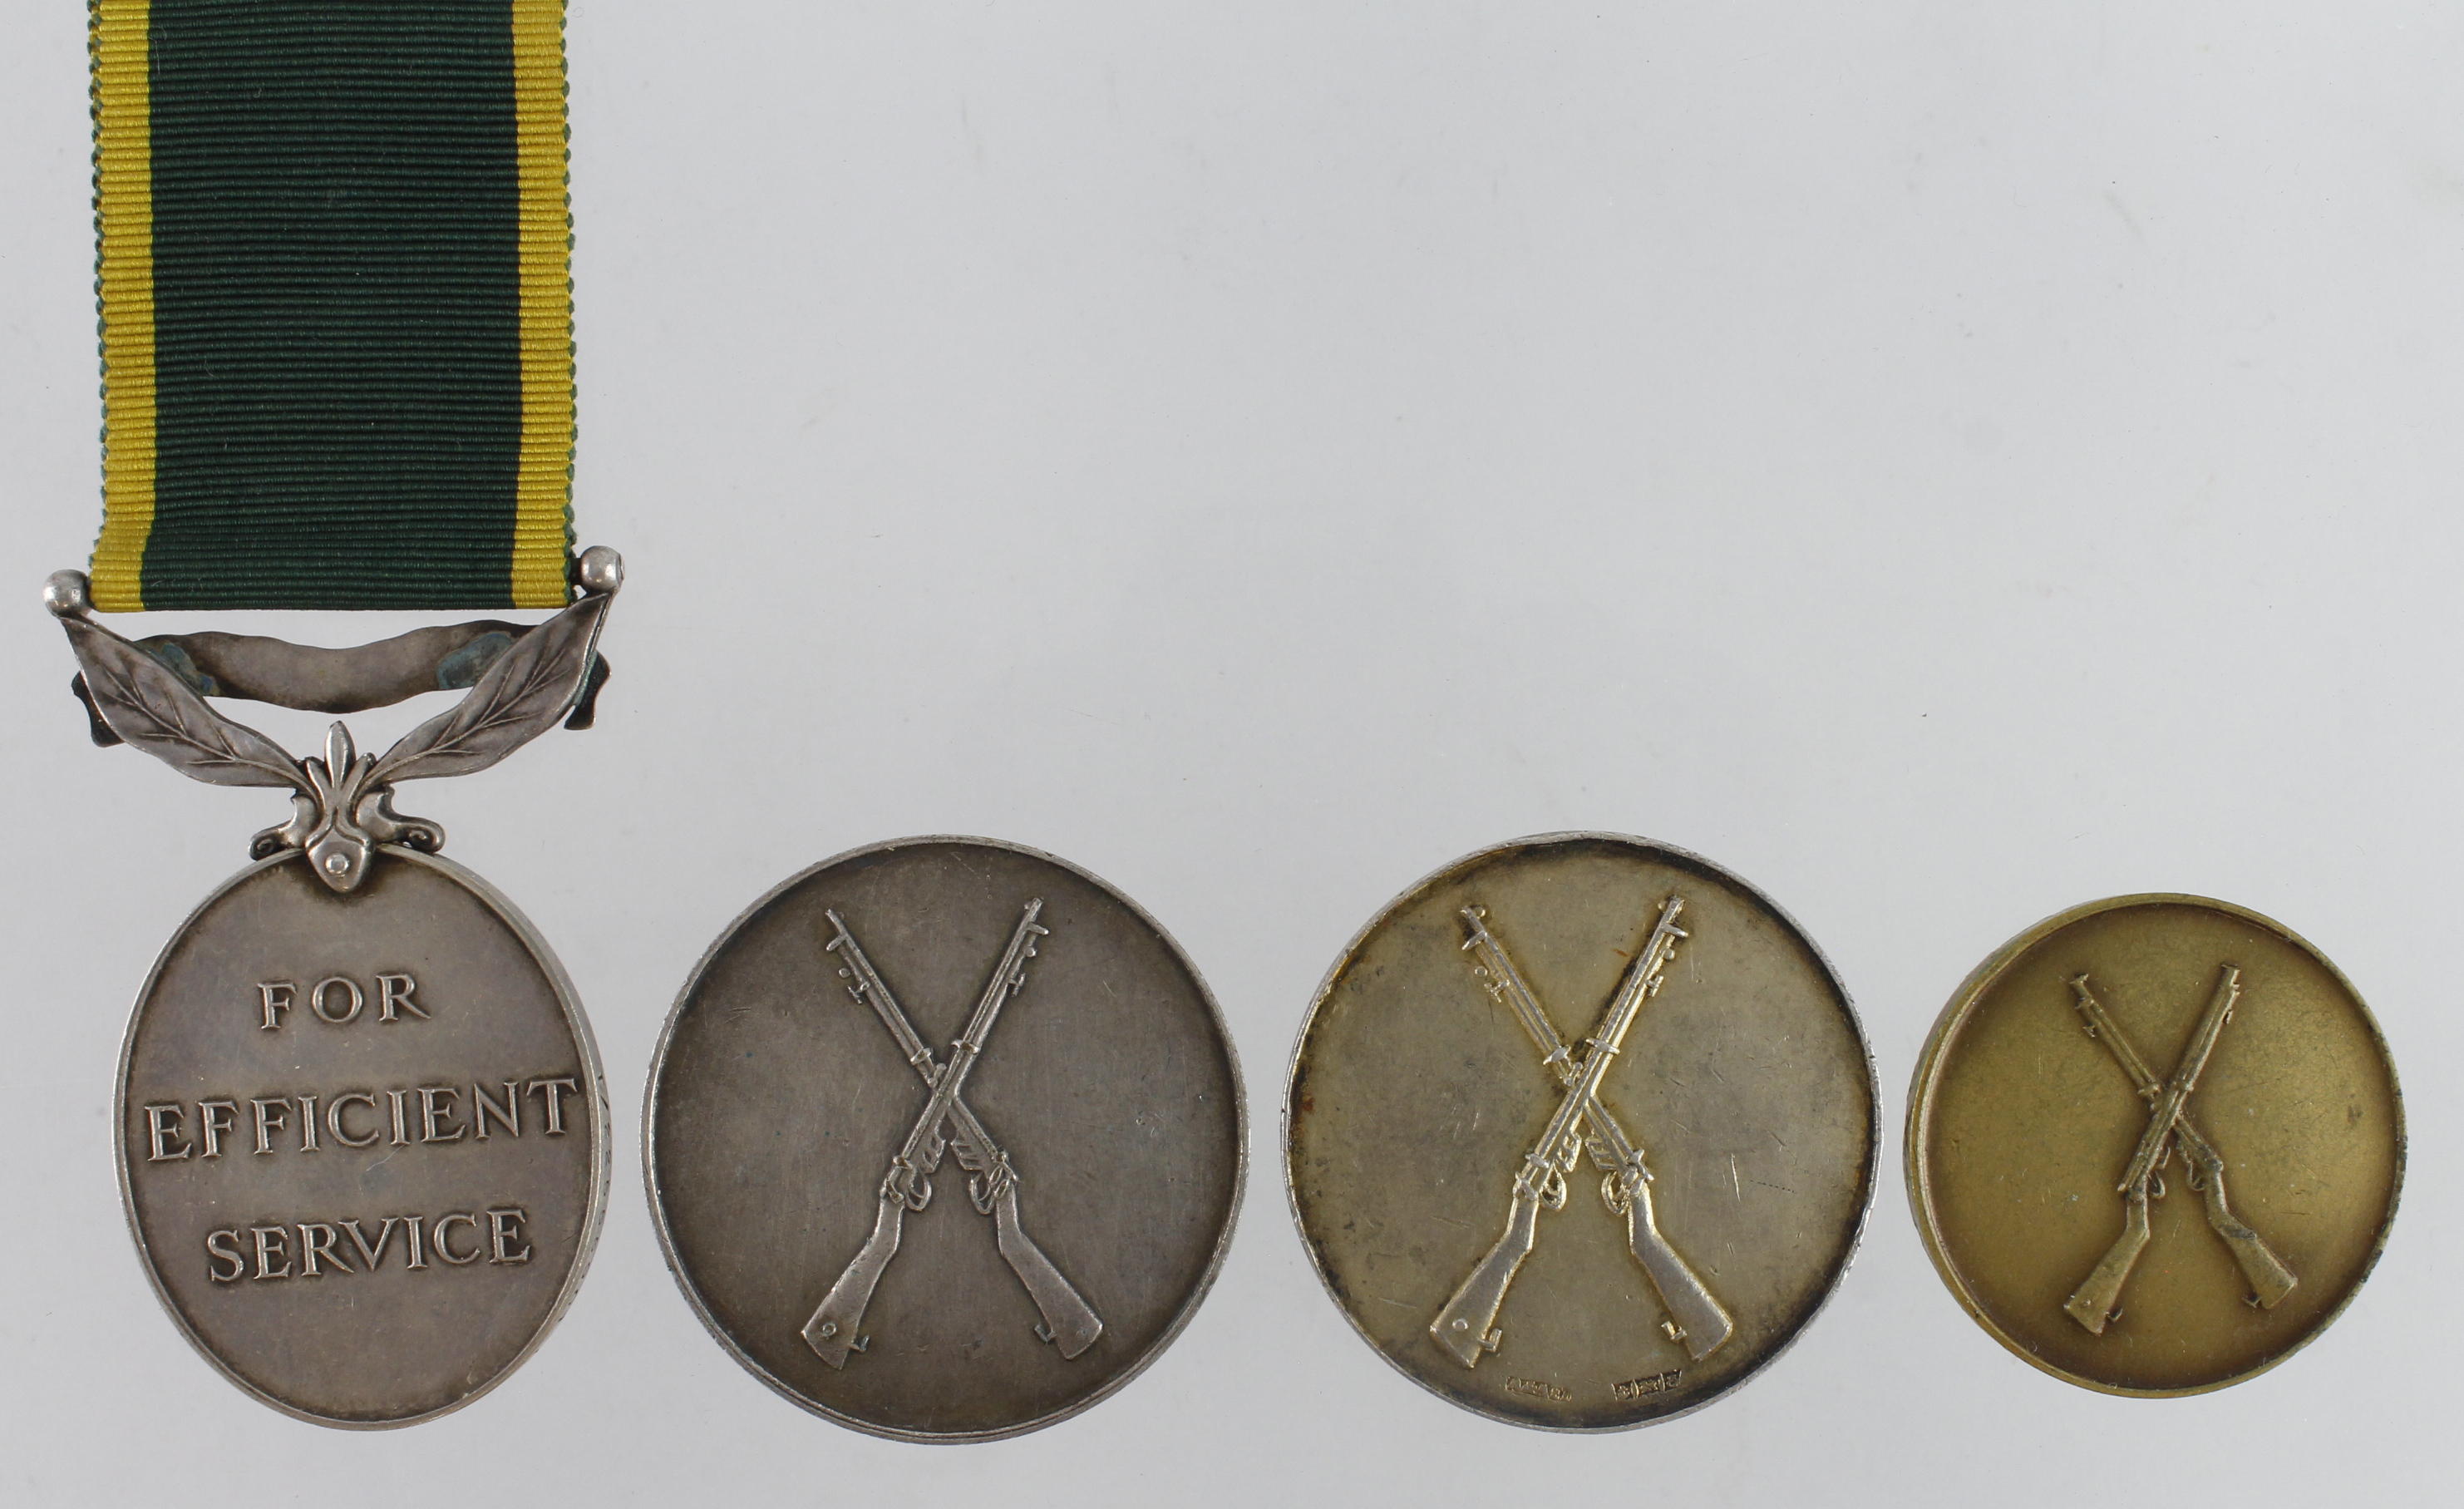 Efficiency Medal QE2 with Territorial clasp (T/22555901 Cpl A K Gallon RASC) with three shooting - Bild 2 aus 2